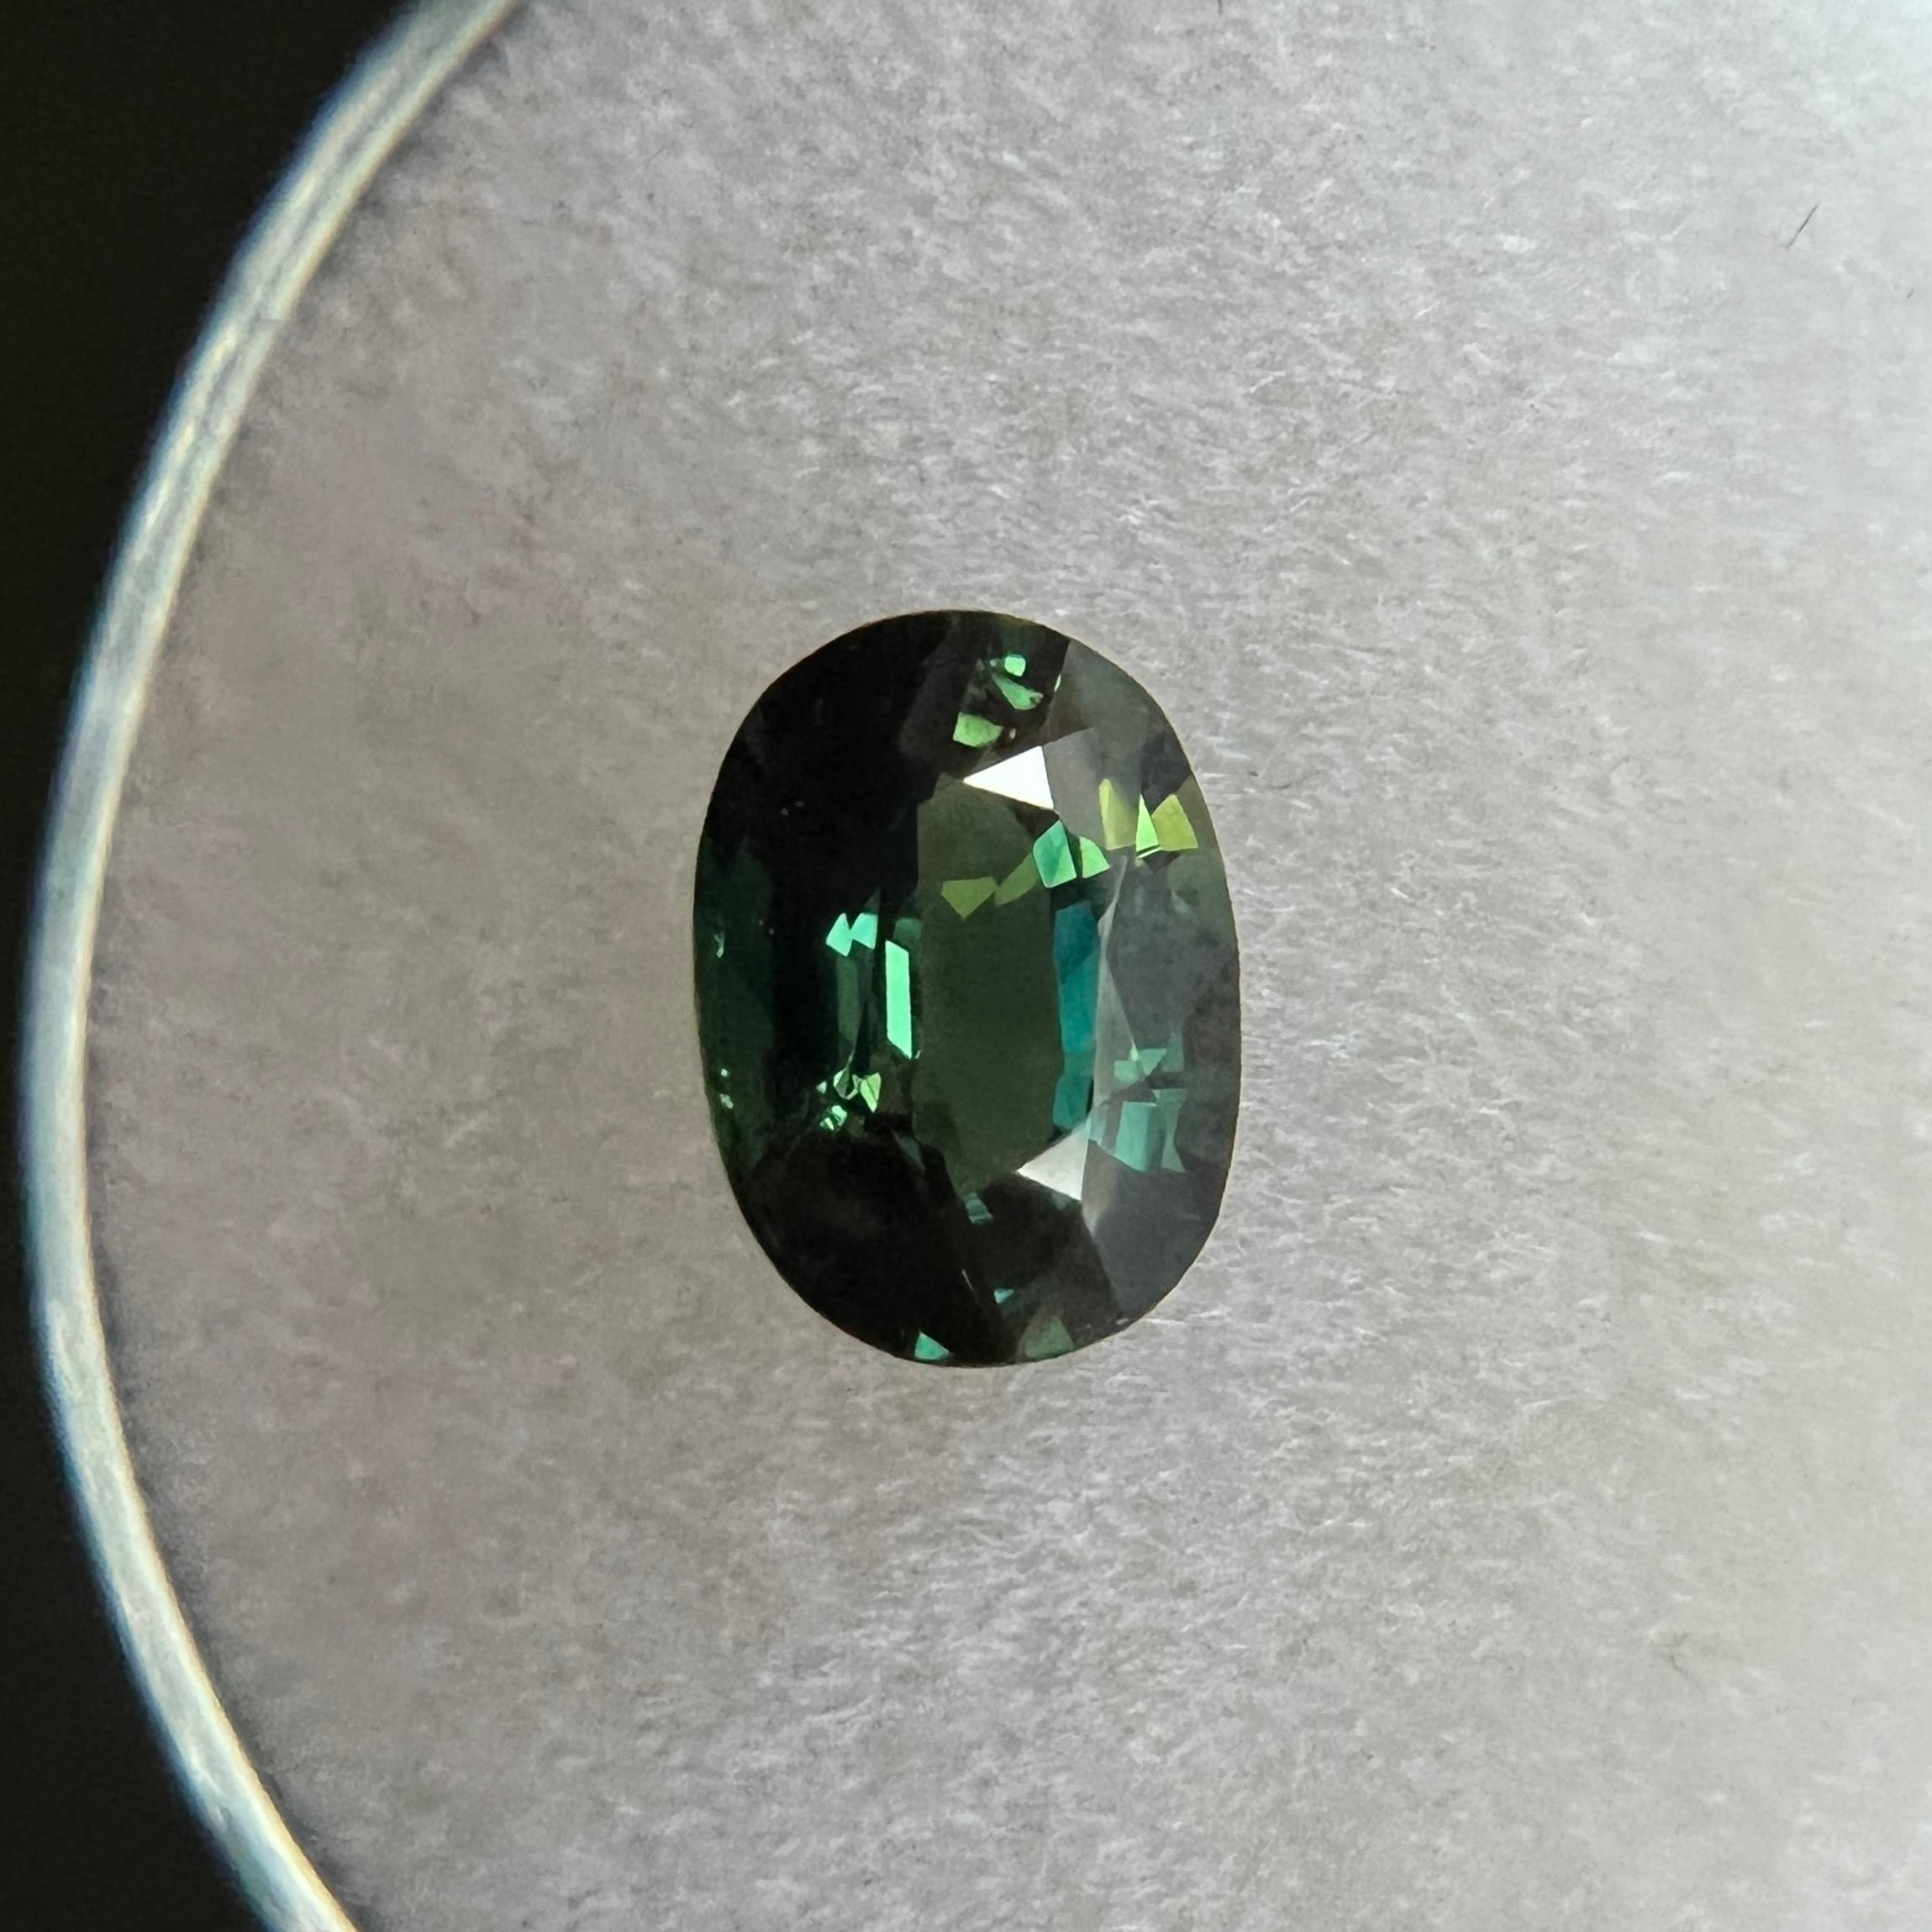 Rare Natural Greenish Yellow Blue Parti-Colour Australian Sapphire Gemstone.

1.47 Carat with a beautiful and unique greenish yellow blue colour and excellent clarity, a very clean stone with only some small natural inclusions visible when looking